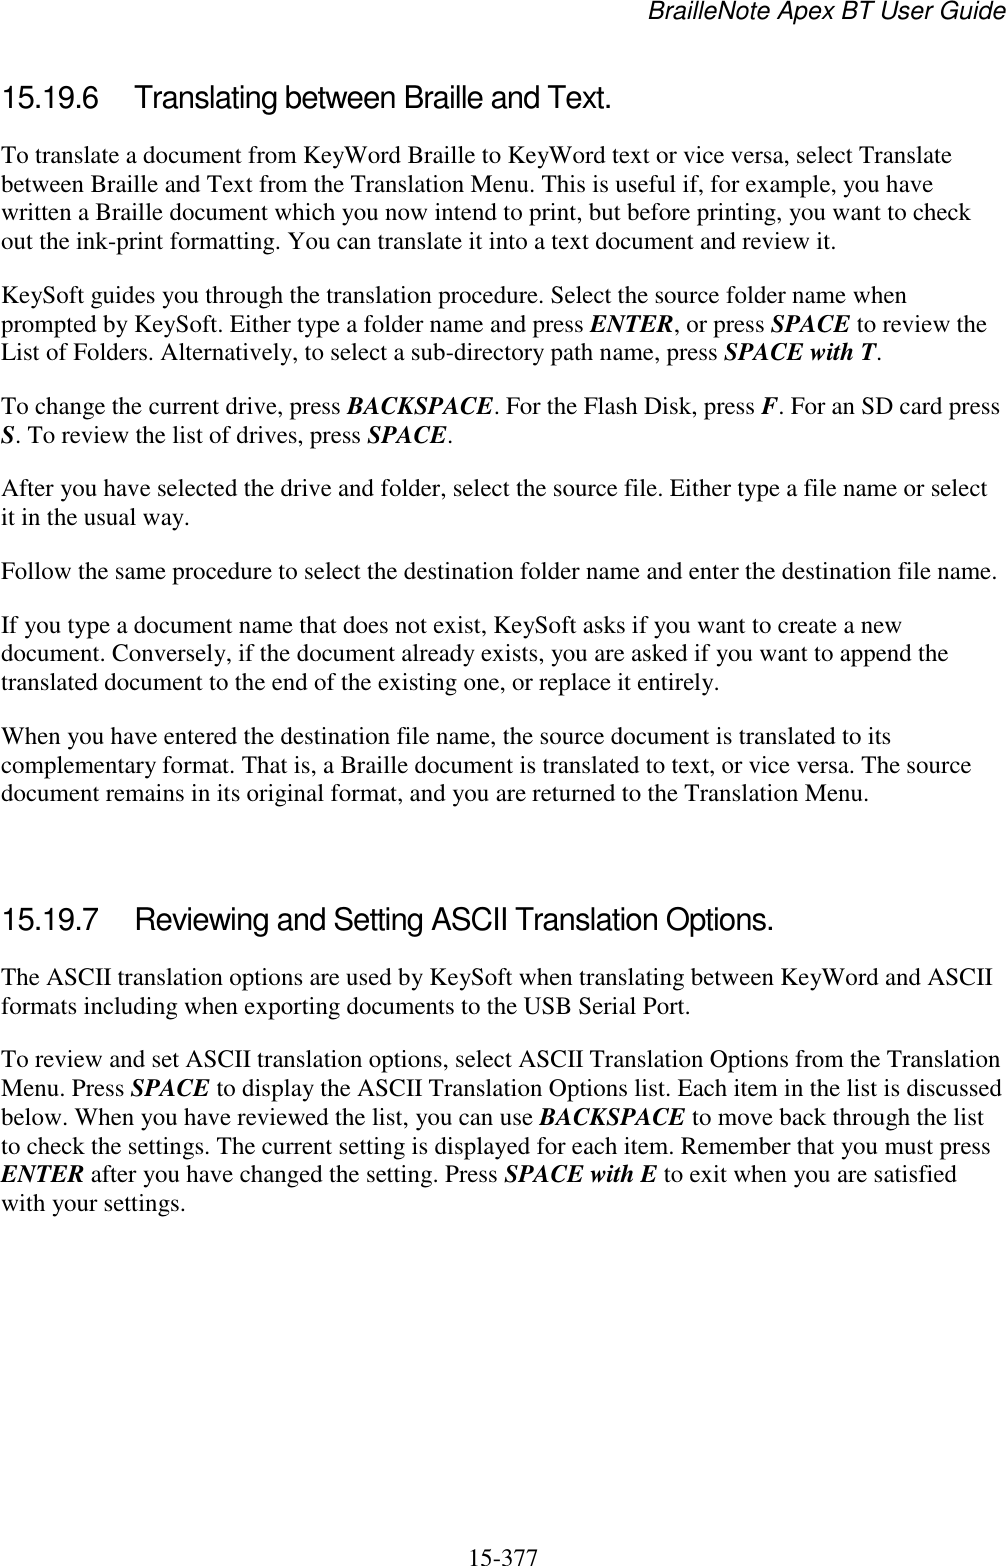 BrailleNote Apex BT User Guide   15-377   15.19.6  Translating between Braille and Text. To translate a document from KeyWord Braille to KeyWord text or vice versa, select Translate between Braille and Text from the Translation Menu. This is useful if, for example, you have written a Braille document which you now intend to print, but before printing, you want to check out the ink-print formatting. You can translate it into a text document and review it. KeySoft guides you through the translation procedure. Select the source folder name when prompted by KeySoft. Either type a folder name and press ENTER, or press SPACE to review the List of Folders. Alternatively, to select a sub-directory path name, press SPACE with T. To change the current drive, press BACKSPACE. For the Flash Disk, press F. For an SD card press S. To review the list of drives, press SPACE. After you have selected the drive and folder, select the source file. Either type a file name or select it in the usual way. Follow the same procedure to select the destination folder name and enter the destination file name. If you type a document name that does not exist, KeySoft asks if you want to create a new document. Conversely, if the document already exists, you are asked if you want to append the translated document to the end of the existing one, or replace it entirely. When you have entered the destination file name, the source document is translated to its complementary format. That is, a Braille document is translated to text, or vice versa. The source document remains in its original format, and you are returned to the Translation Menu.   15.19.7  Reviewing and Setting ASCII Translation Options. The ASCII translation options are used by KeySoft when translating between KeyWord and ASCII formats including when exporting documents to the USB Serial Port. To review and set ASCII translation options, select ASCII Translation Options from the Translation Menu. Press SPACE to display the ASCII Translation Options list. Each item in the list is discussed below. When you have reviewed the list, you can use BACKSPACE to move back through the list to check the settings. The current setting is displayed for each item. Remember that you must press ENTER after you have changed the setting. Press SPACE with E to exit when you are satisfied with your settings.  